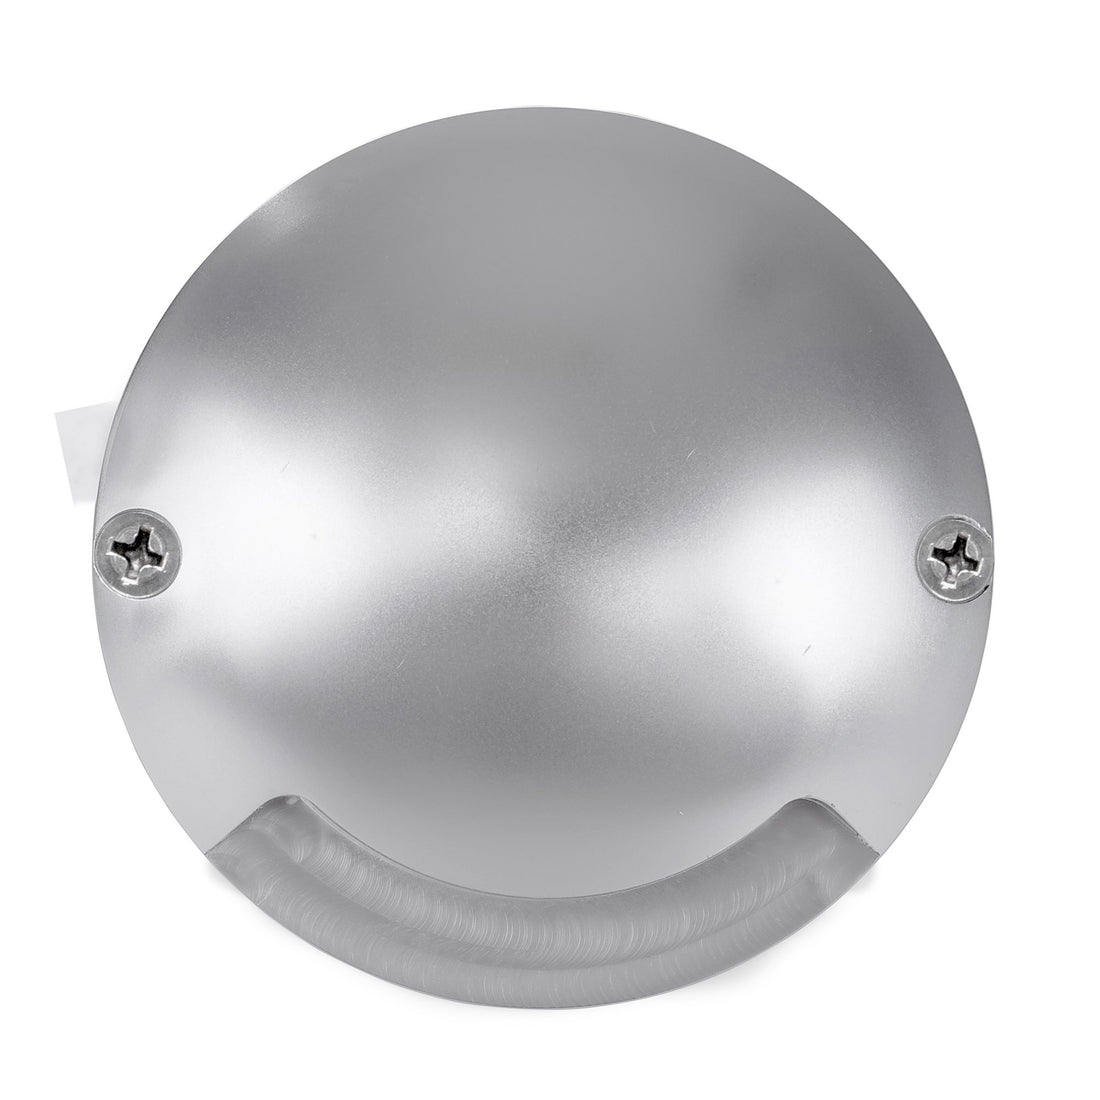 Dome Silver Aluminium One-way Recessed Deck Light